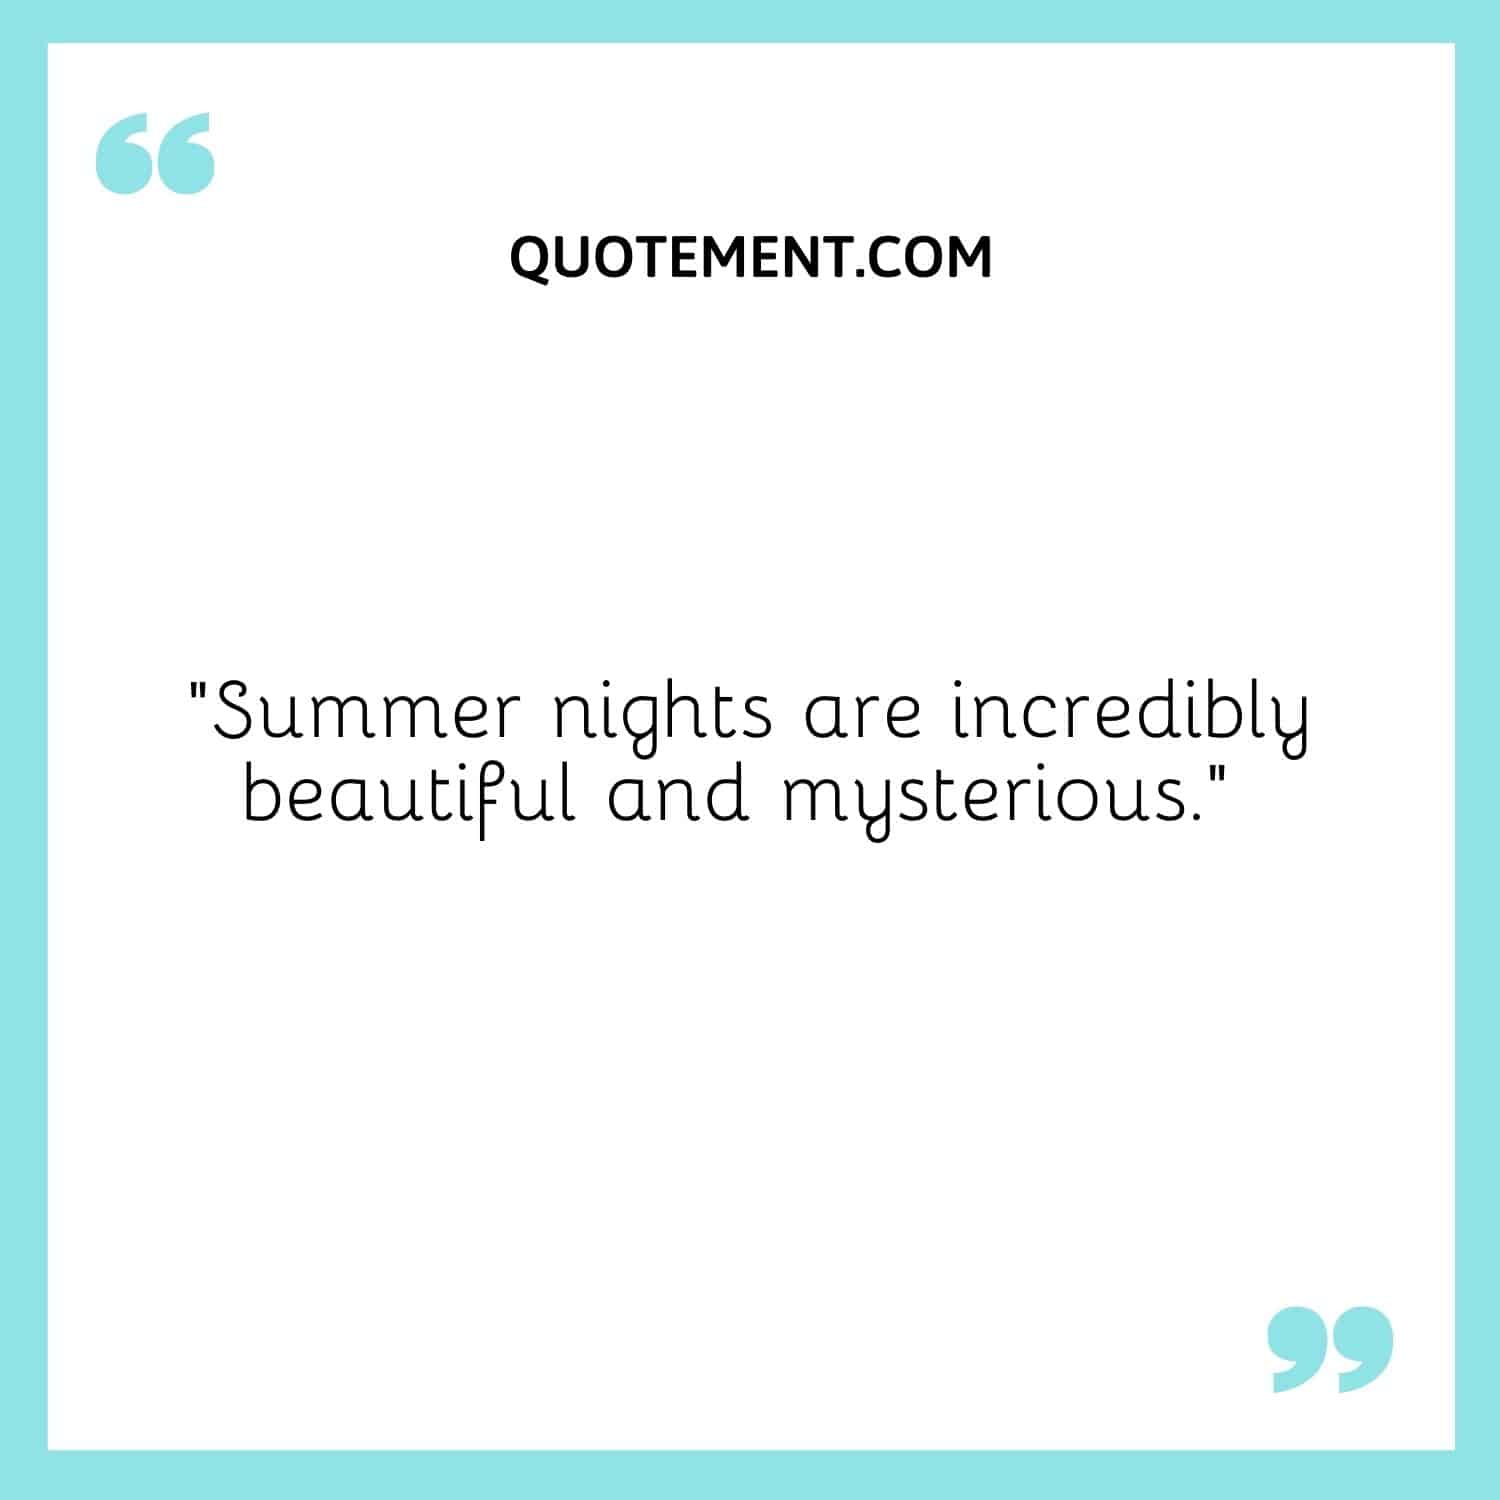 Summer nights are incredibly beautiful and mysterious.